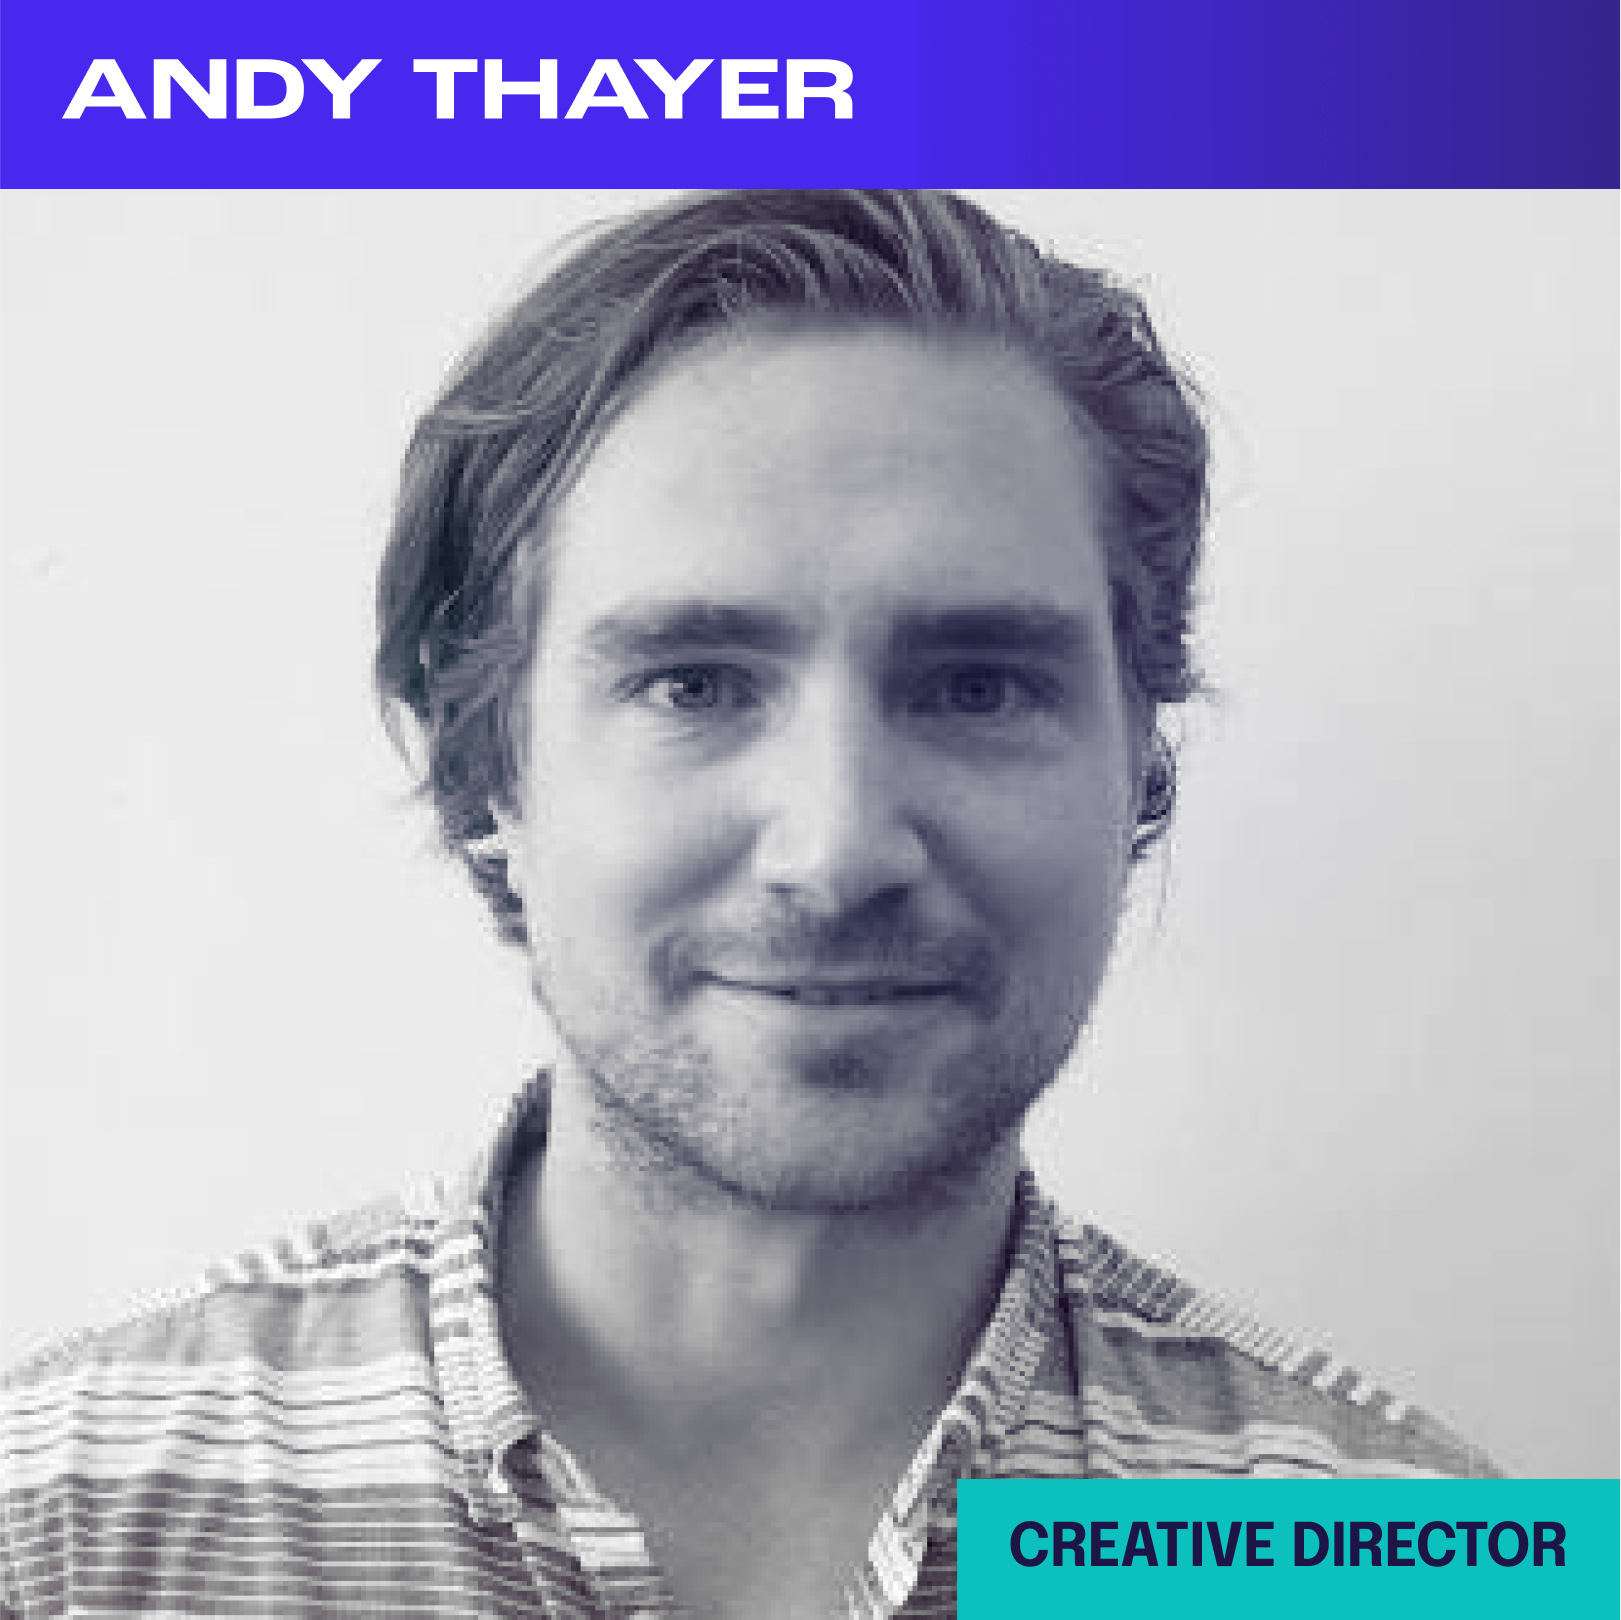 Andy Thayer Growth Spark Creative Director